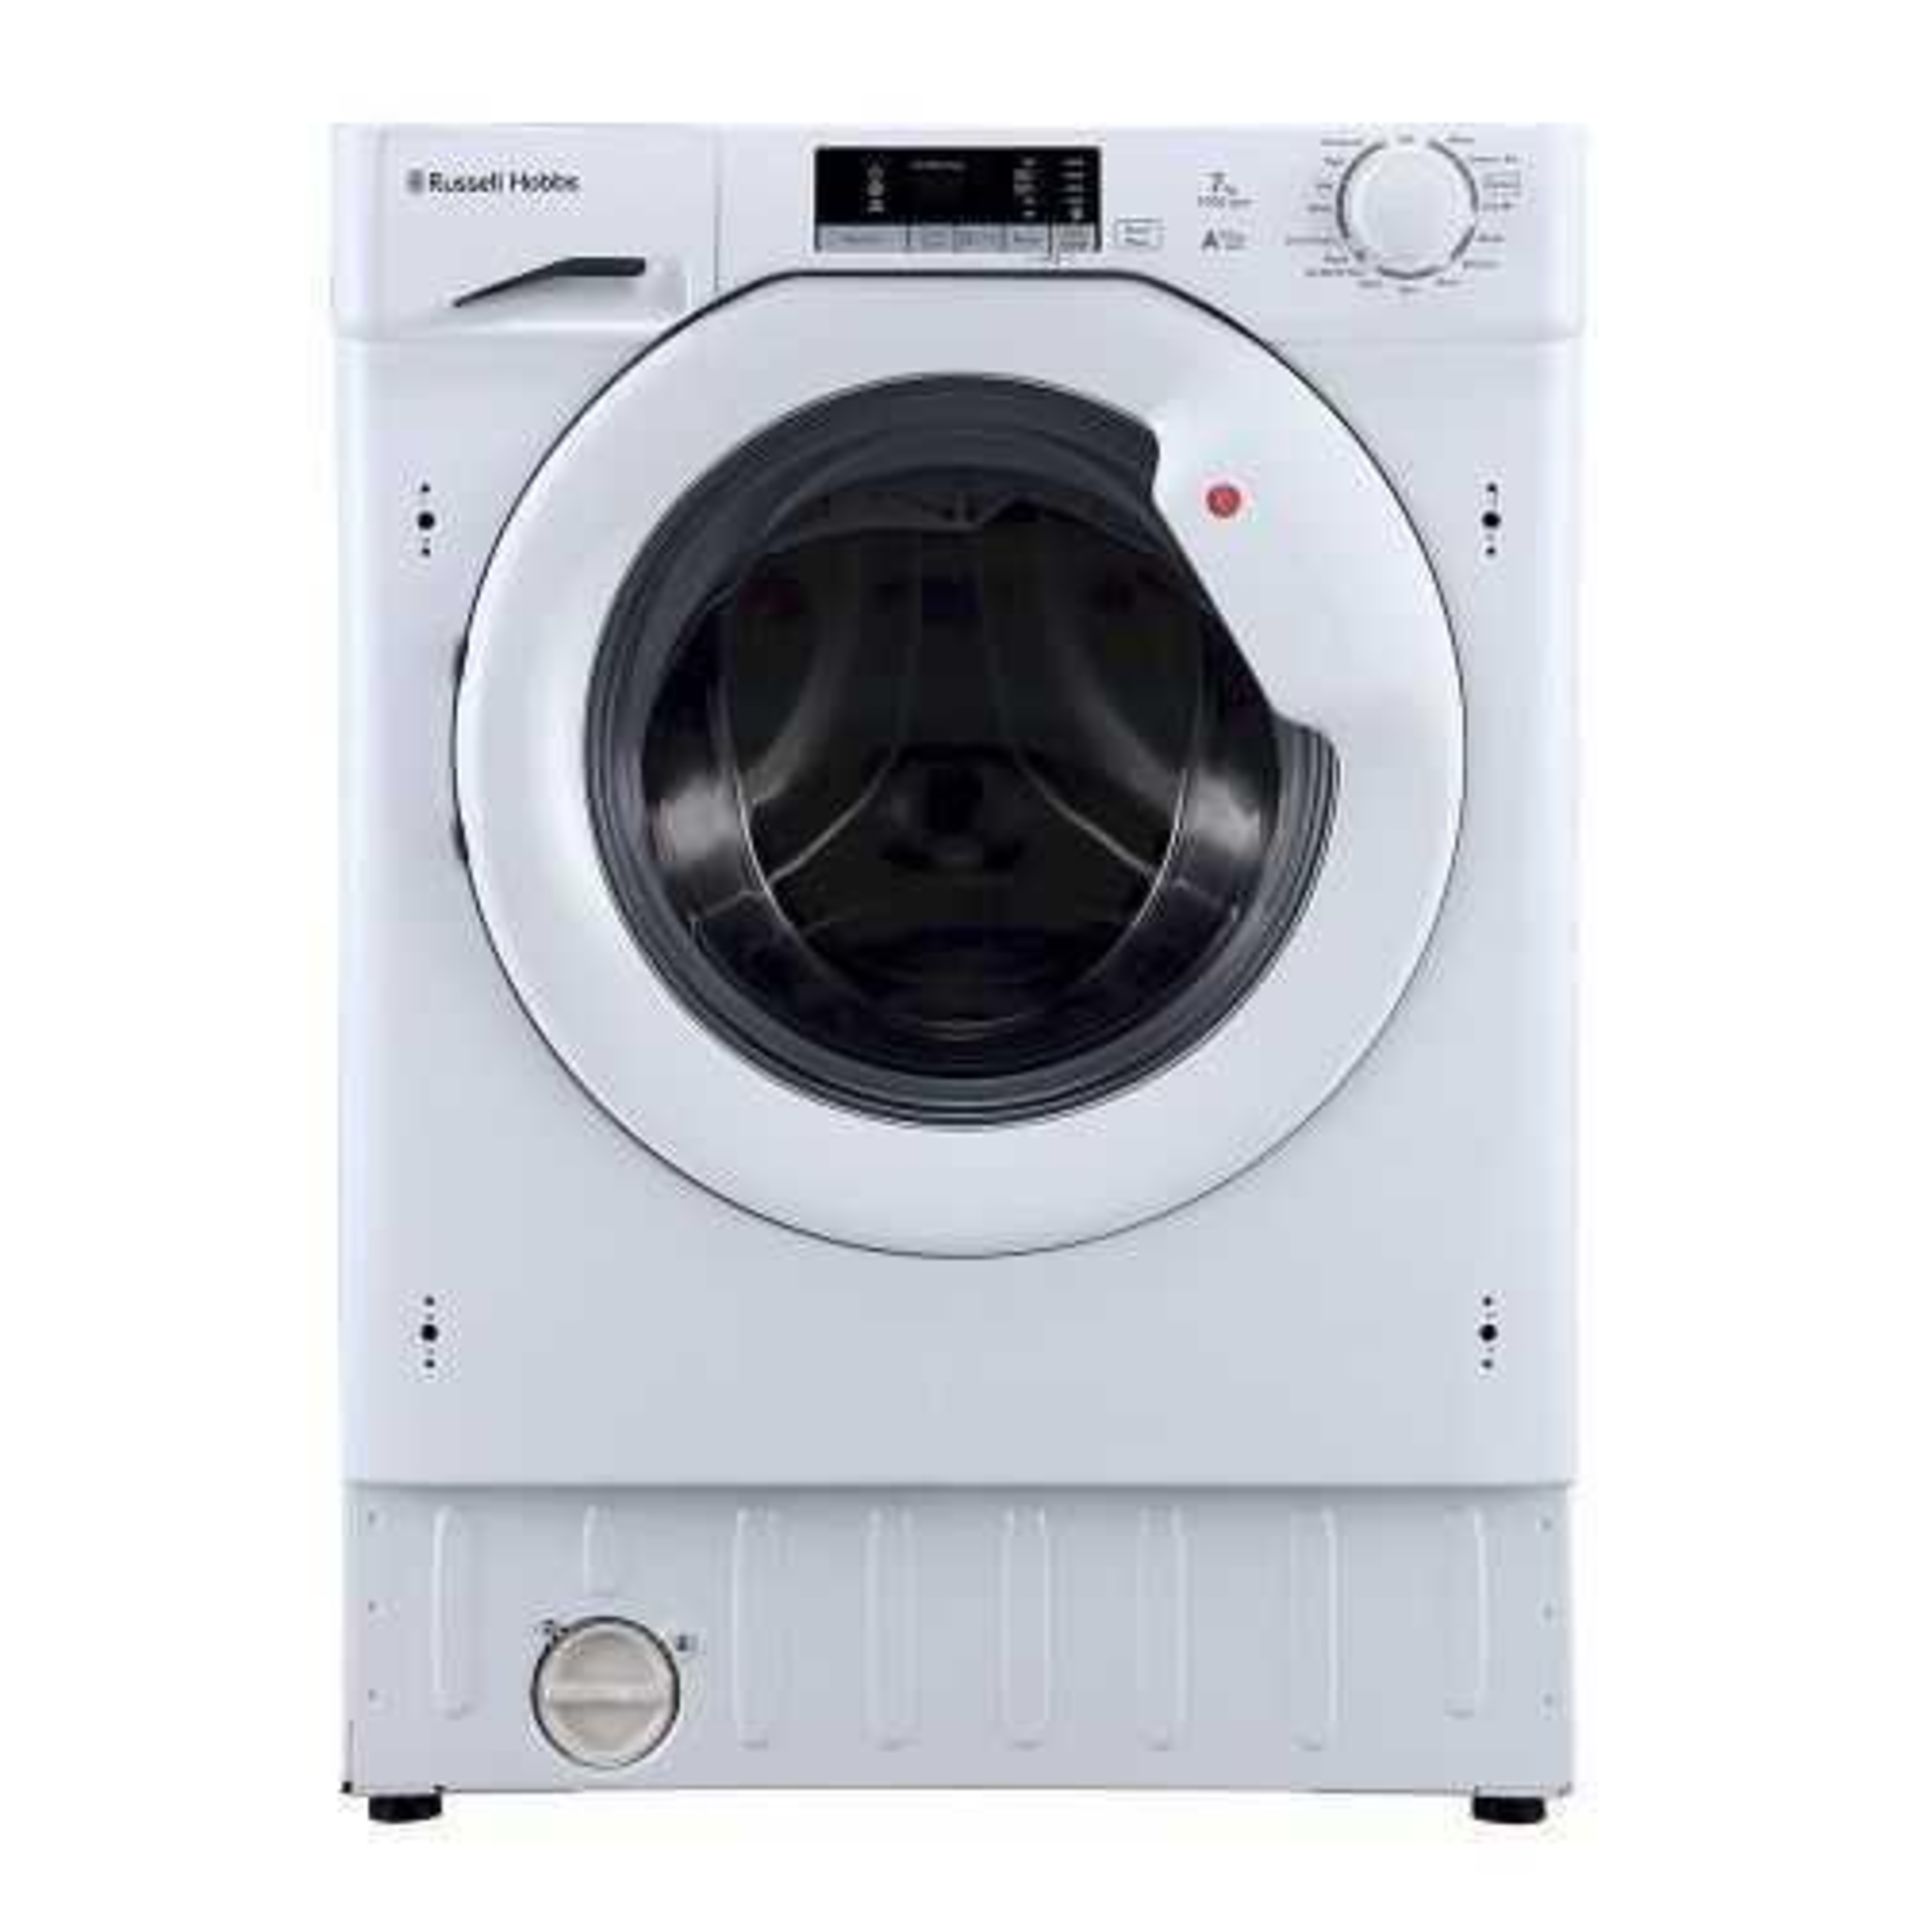 (Kw) RRP £379 Lot To Contain X1 Beko Intergrated Washing Machine 7Kg, White, Unboxed